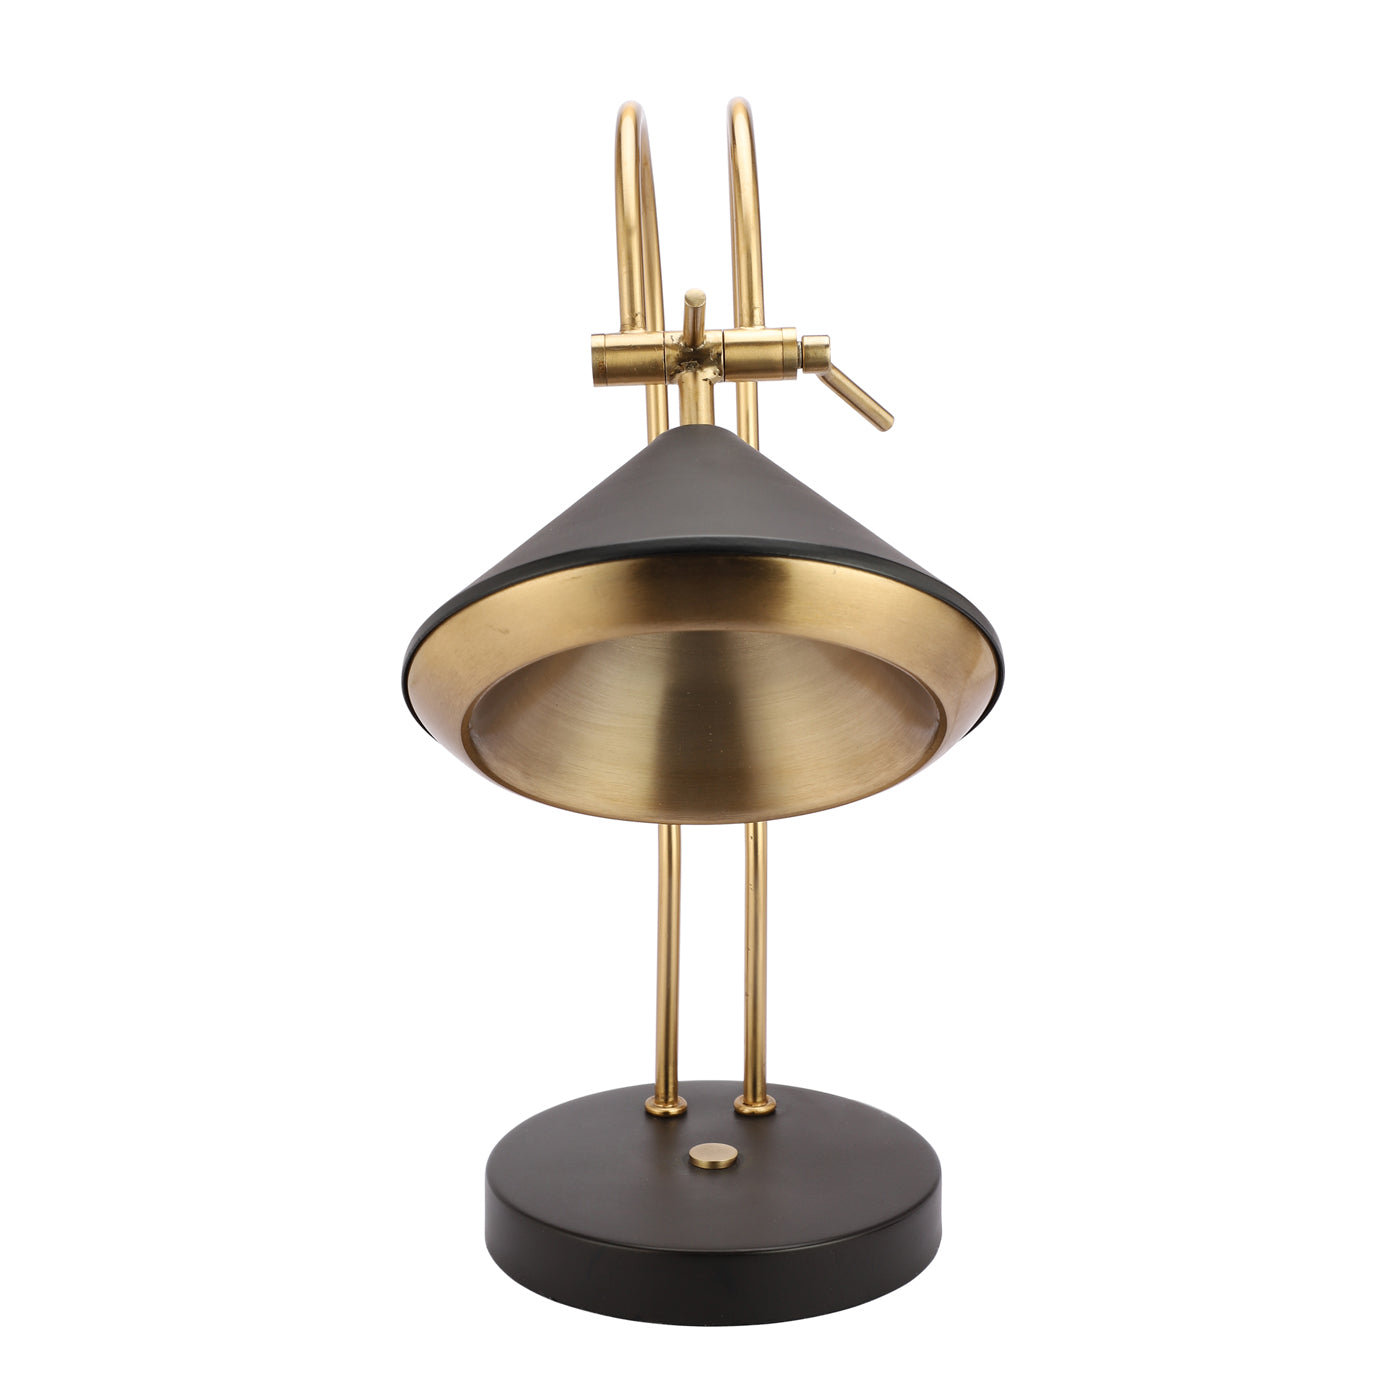 The "Shelby" Adjustable Table lamp in Black and Gold Finish